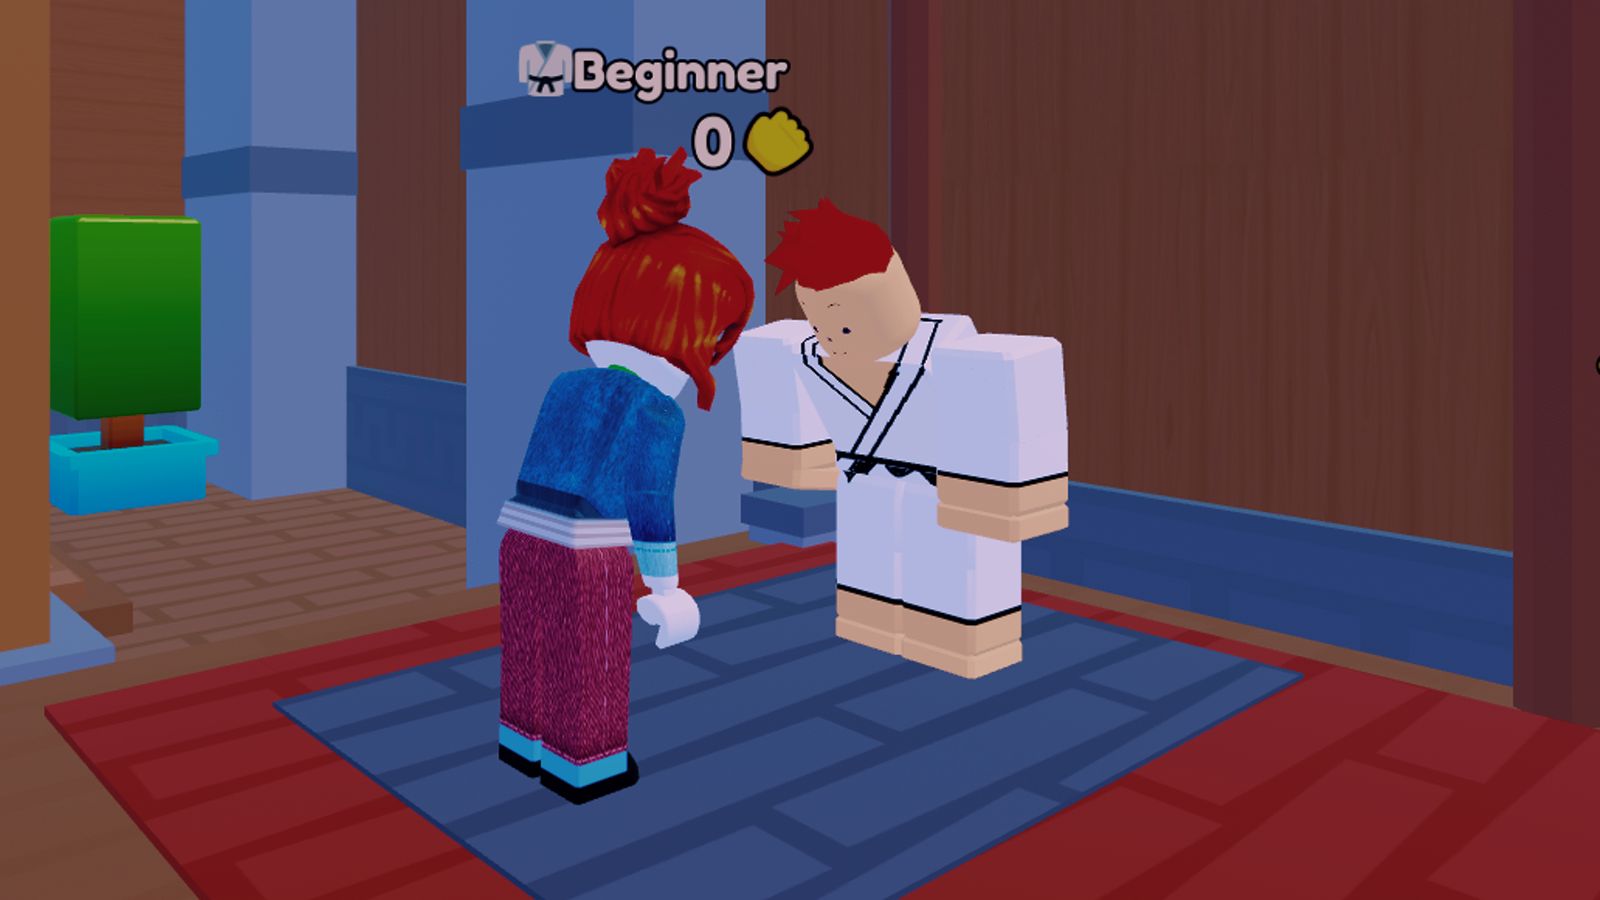 Two Roblox characters with red hair bow to each other on a blue dojo mat.